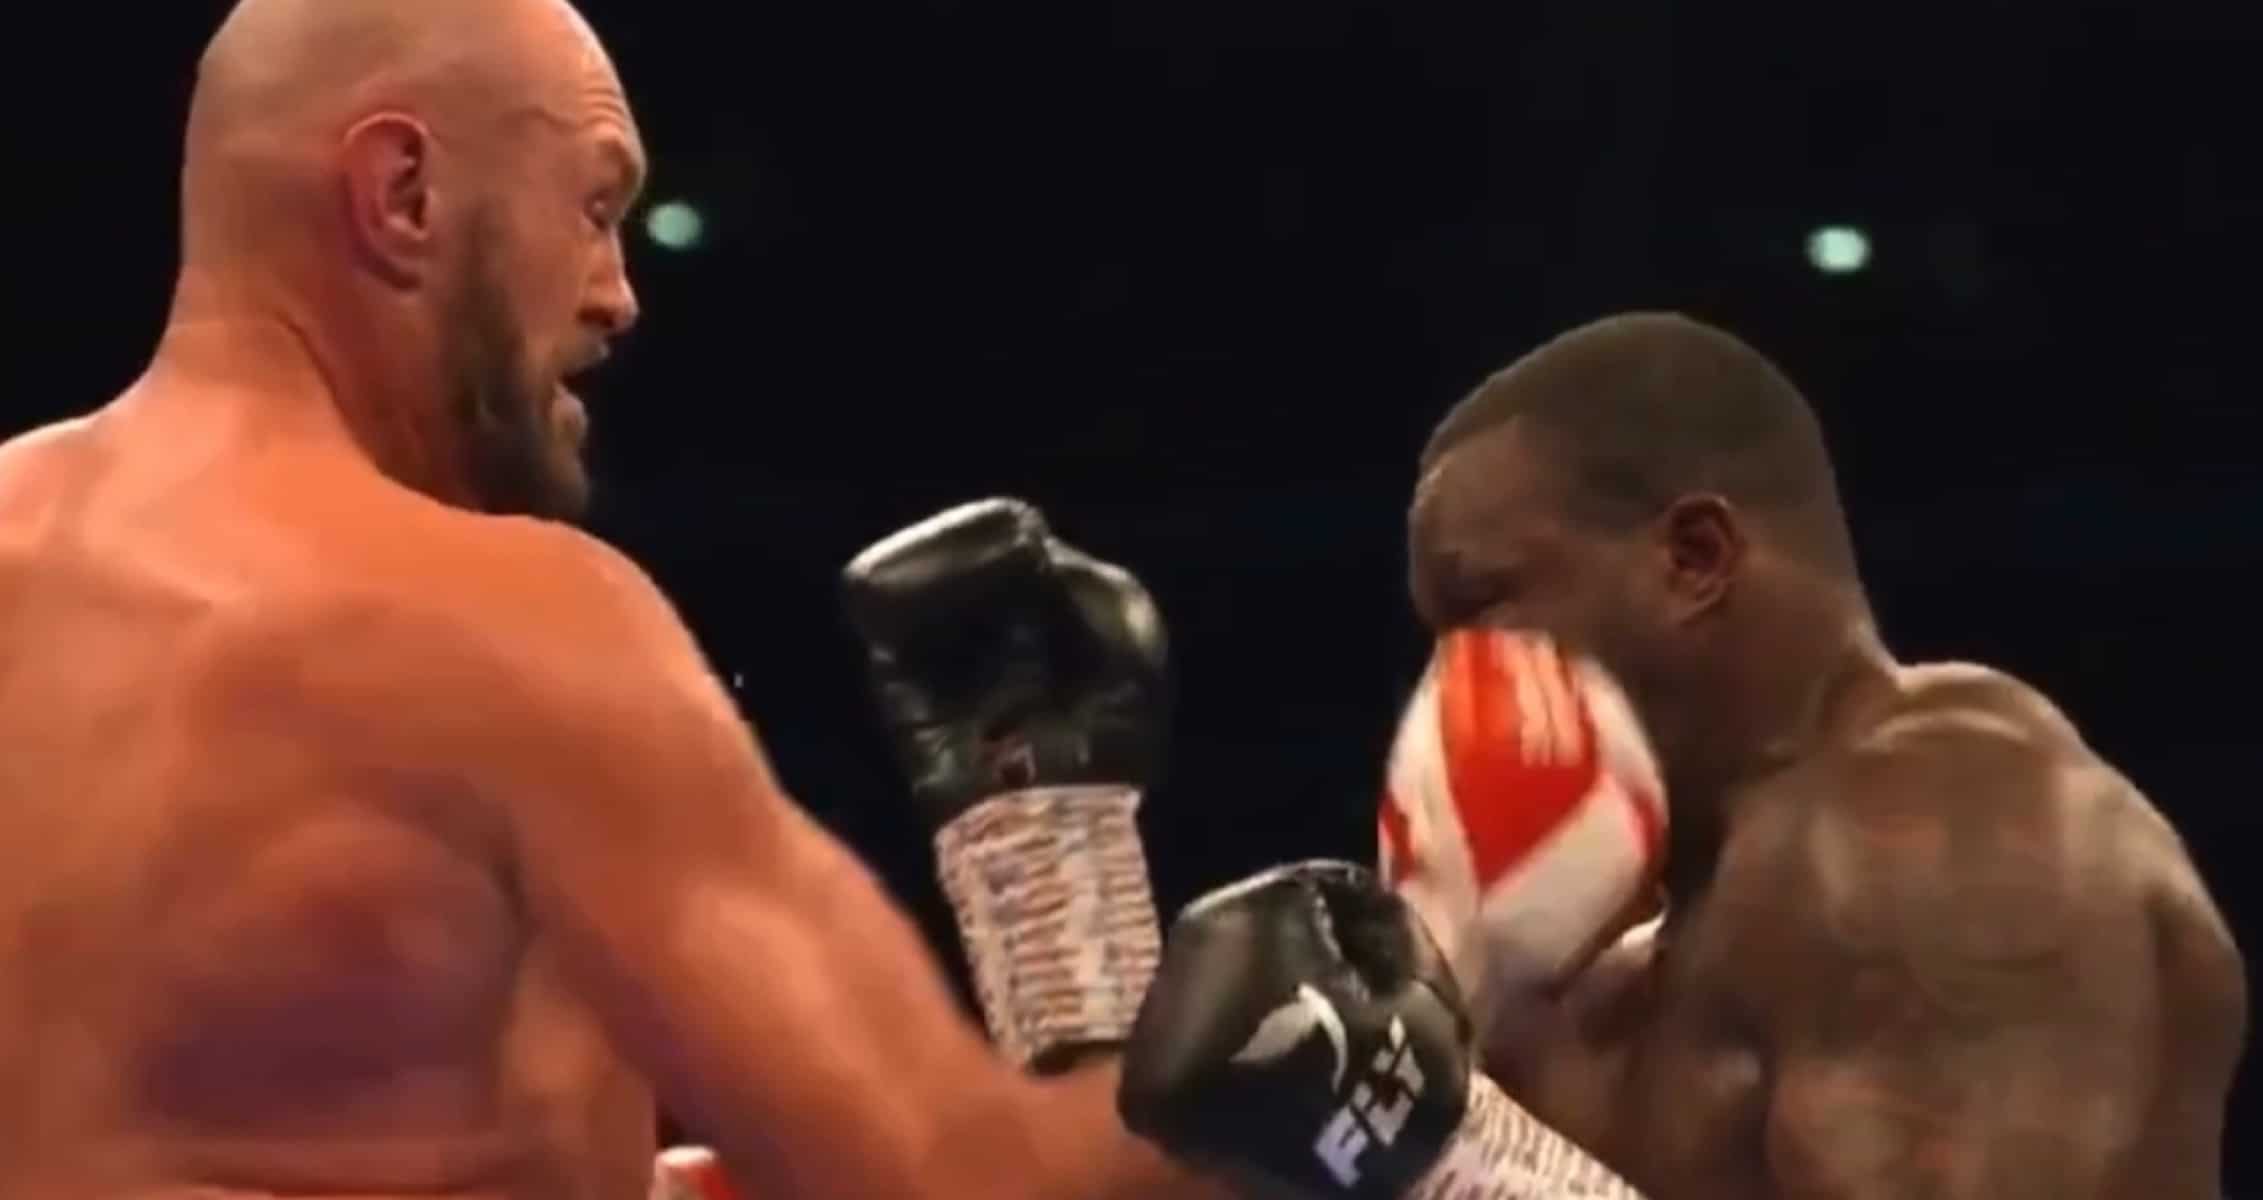 Tyson Fury Knockouts Dillian Whyte in Round 6